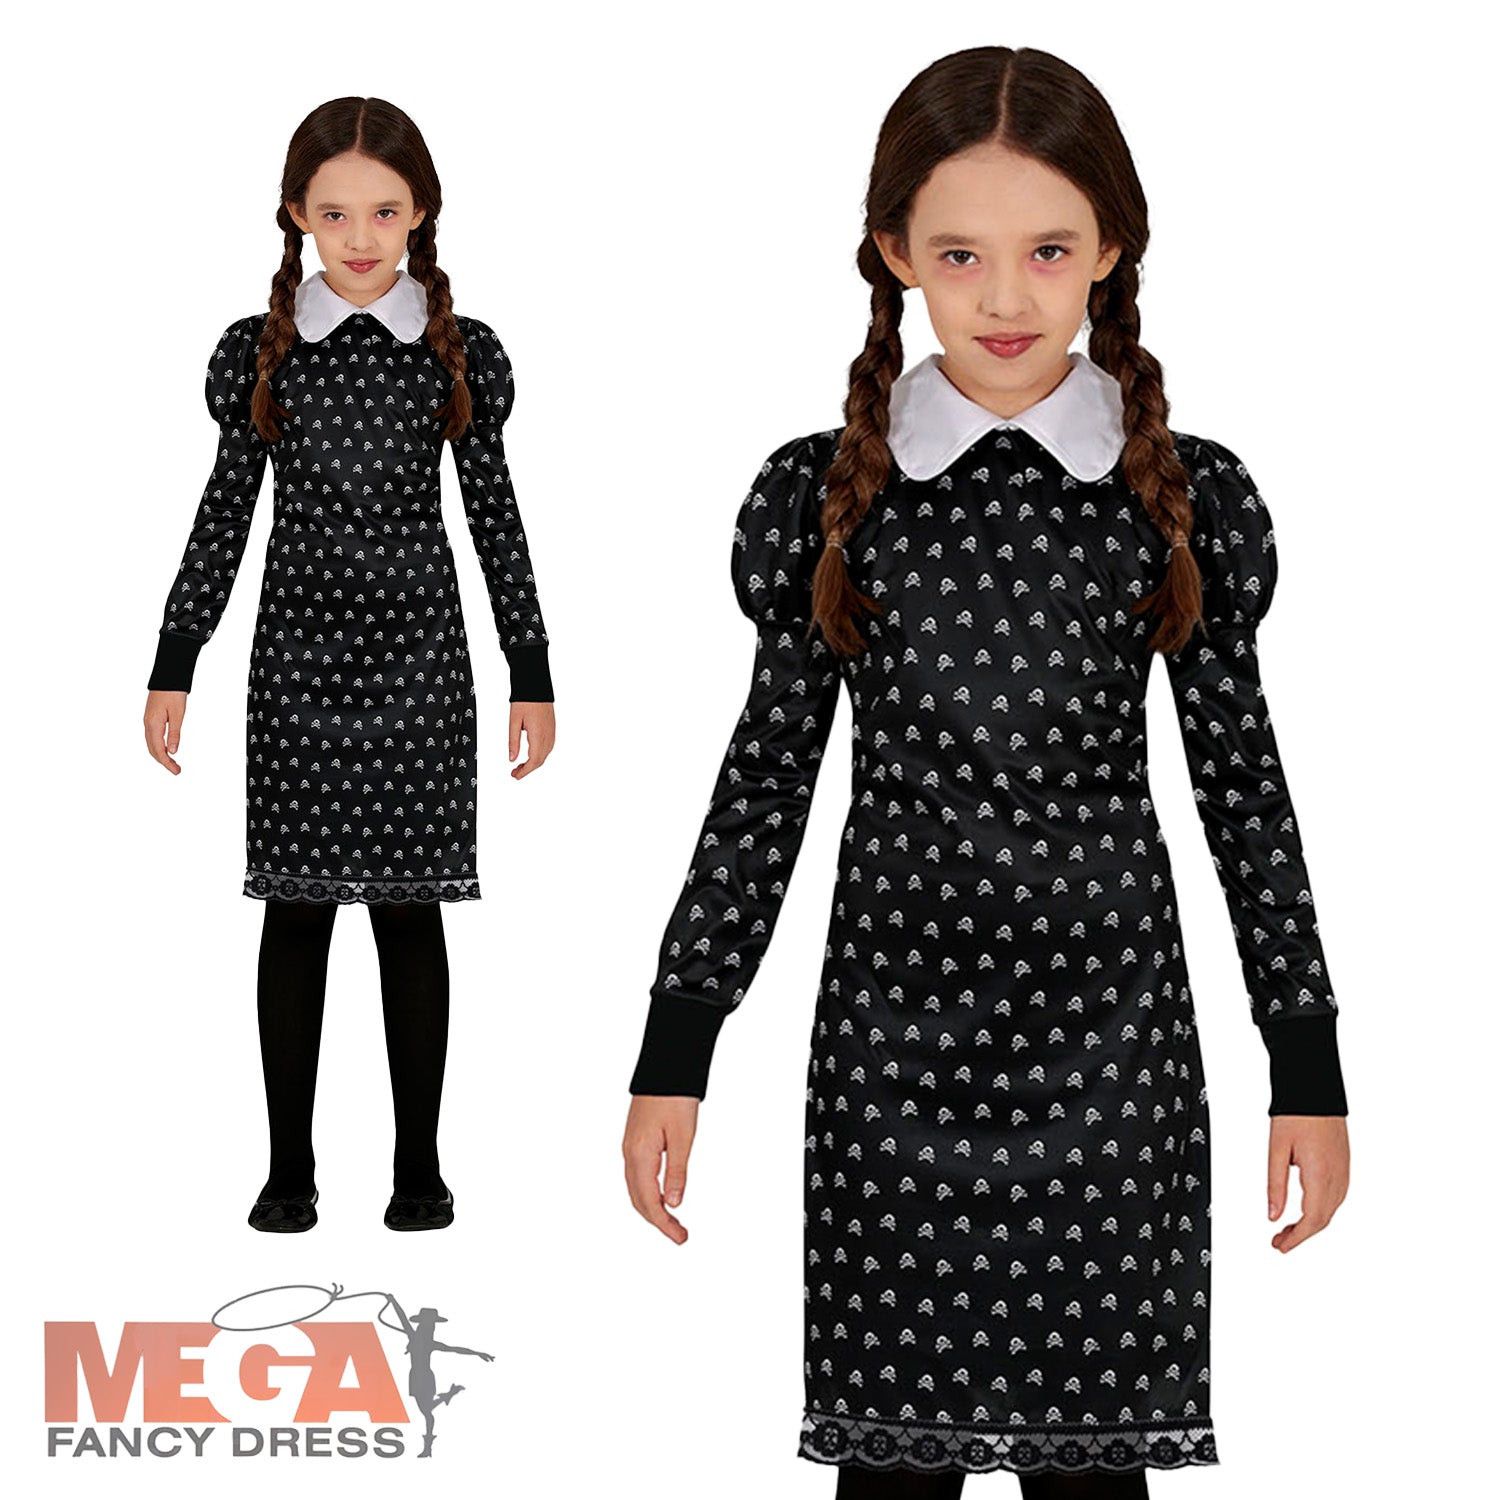 Buy FancyDressWale Metal Wednesday Addams Costume Girls Peter Pan Collar  Dress Long Sleeve Halloween Addams Family Costume Black Dress Outfit (3-4  Years) Online at Low Prices in India - Amazon.in